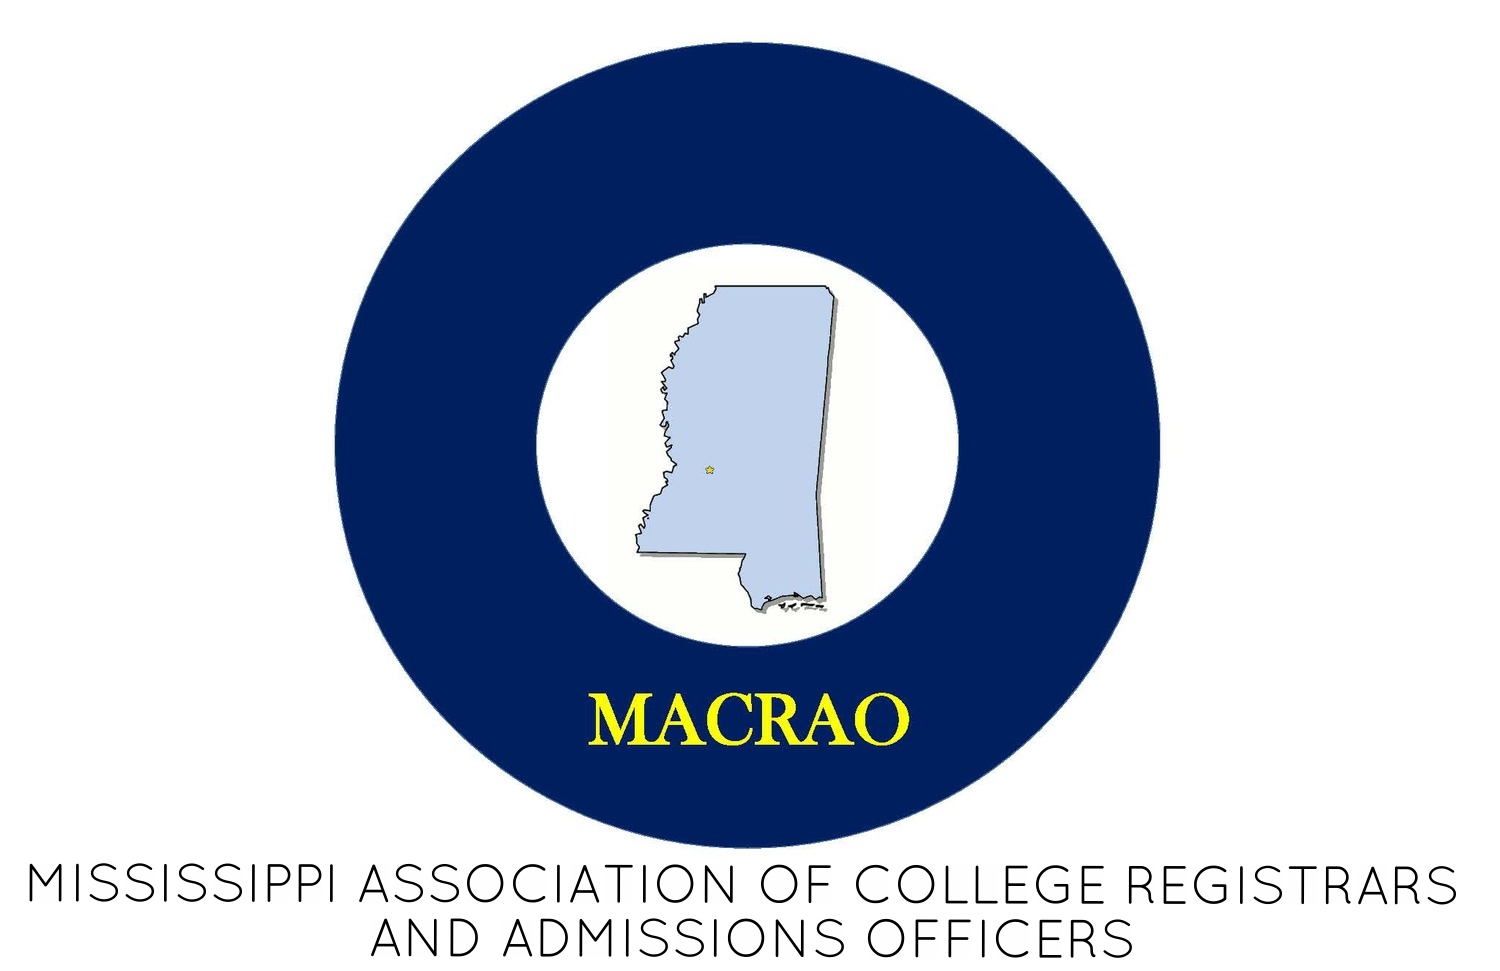 Mississippi Association of College Registrars and Admissions Officers 